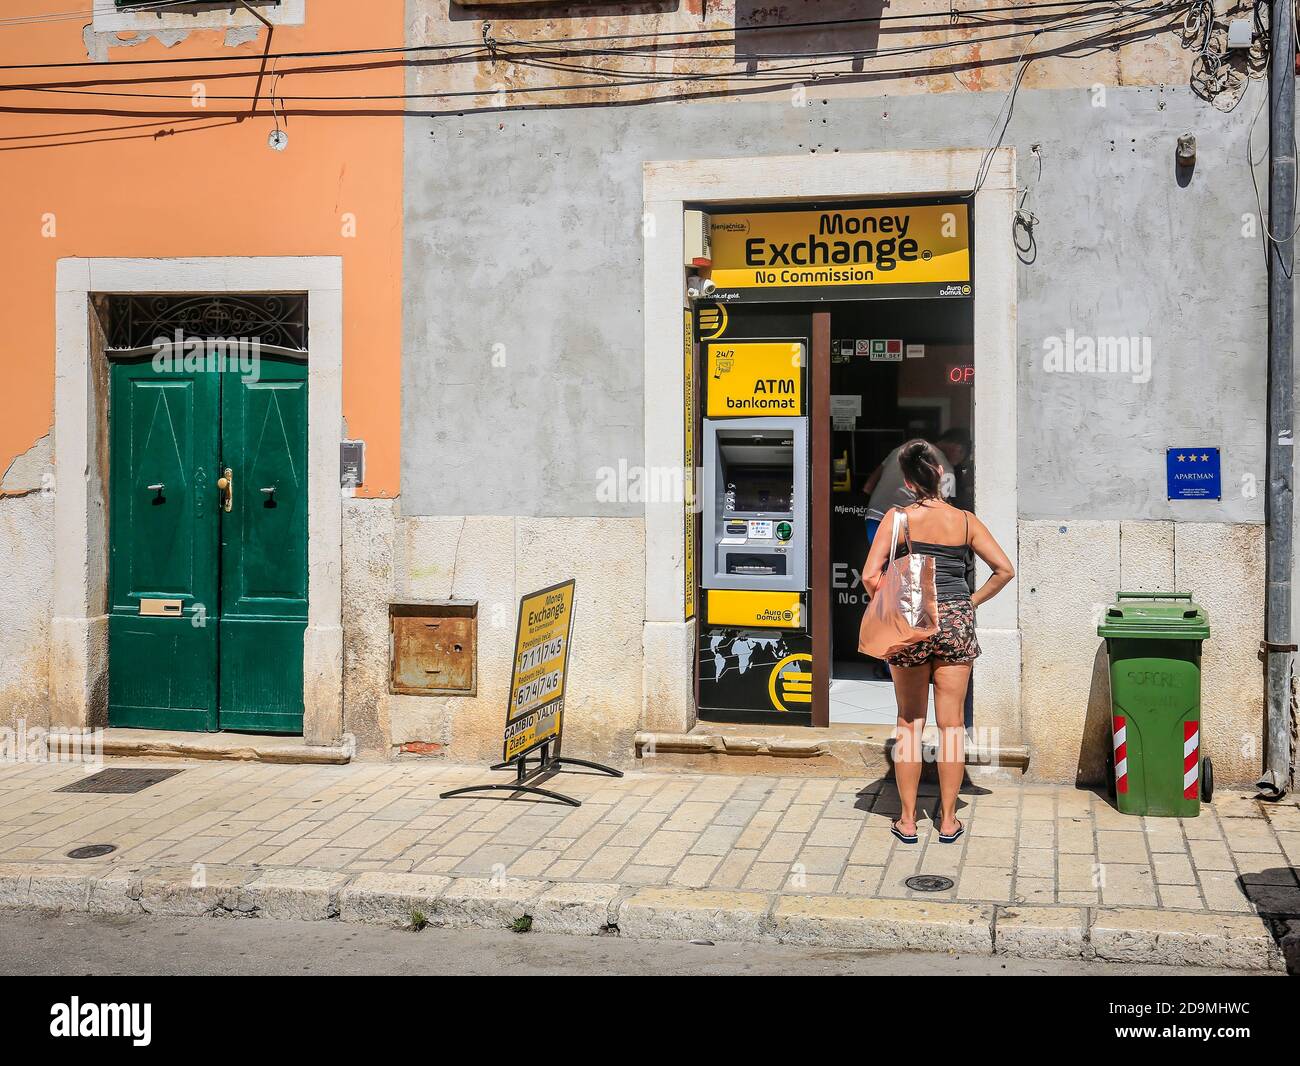 Rovinj, Istria, Croatia - Exchange office and ATM cash machine in the old town streets of the port city of Rovinj. Stock Photo